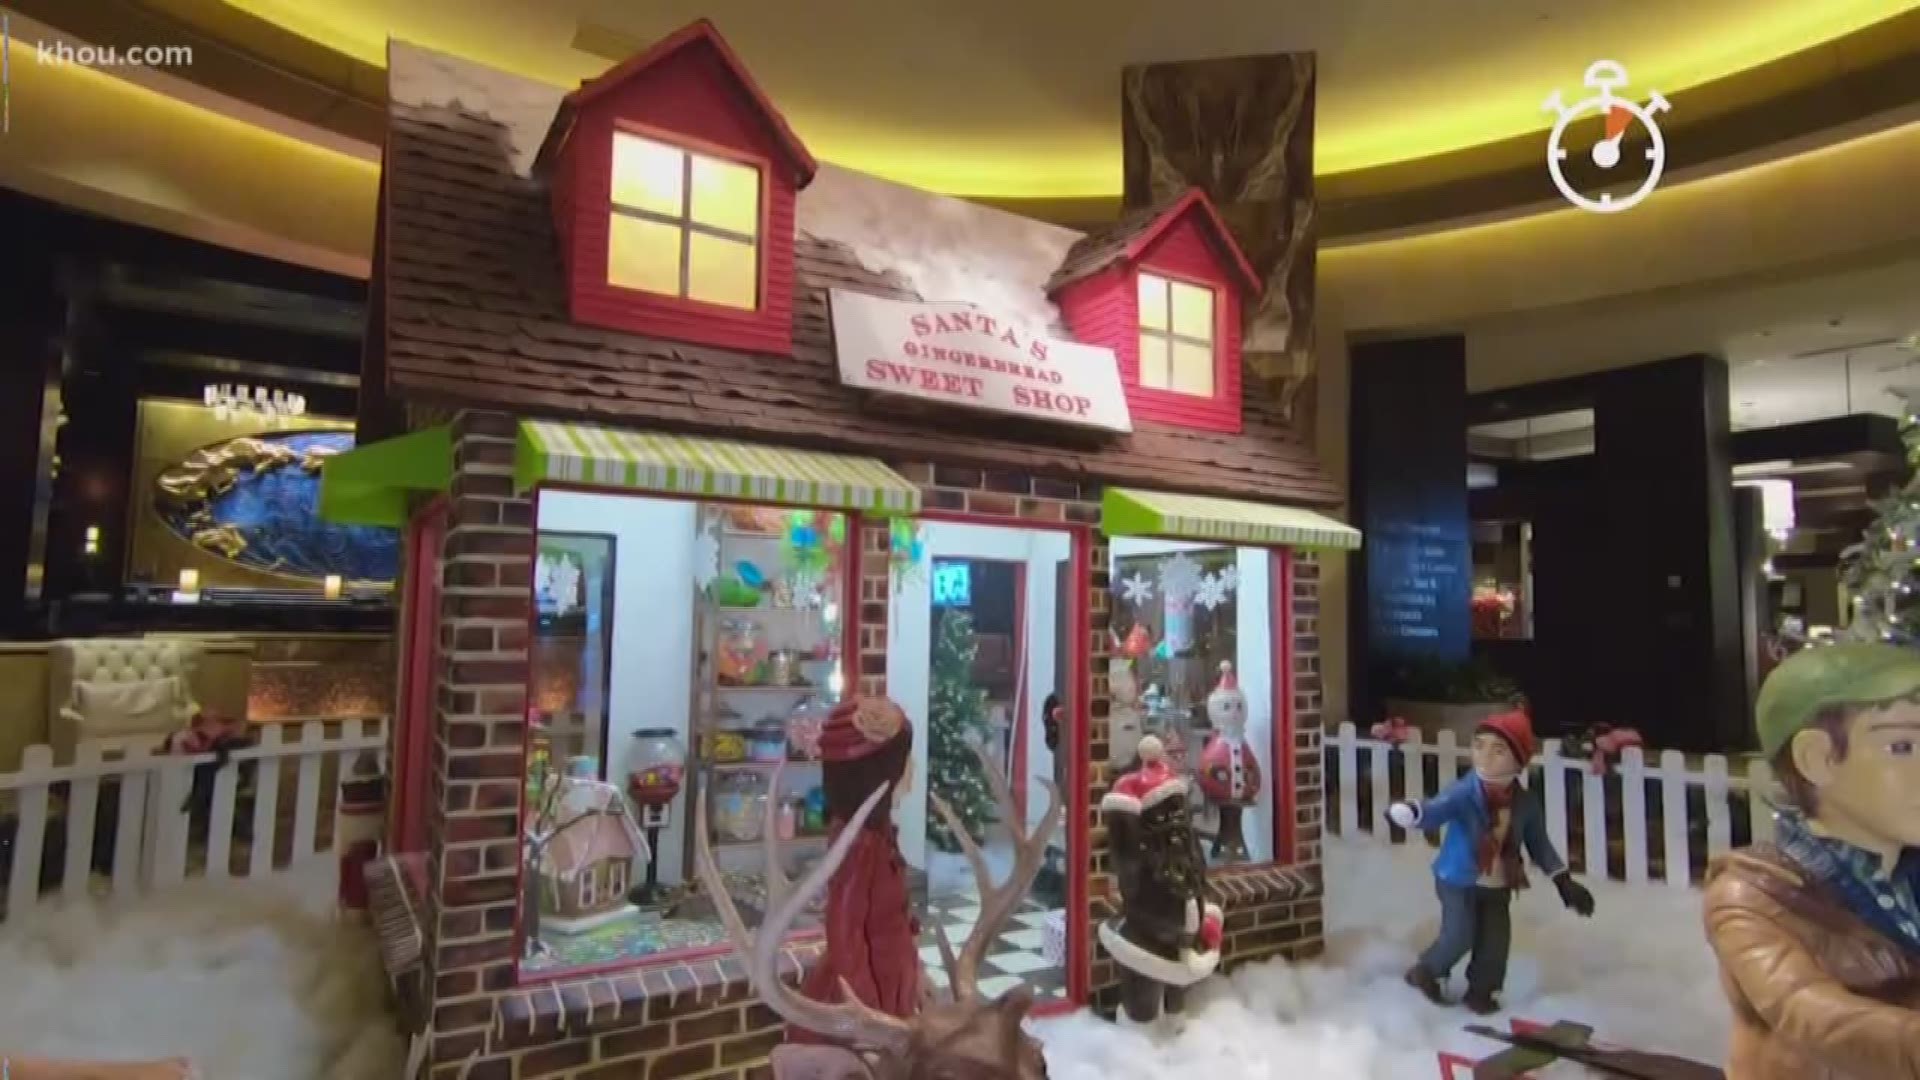 Gingerbread houses aren't just tasty, they're works of art! Our Janel Forte shows us how some Houston chefs create one, in this morning's HTown 60.